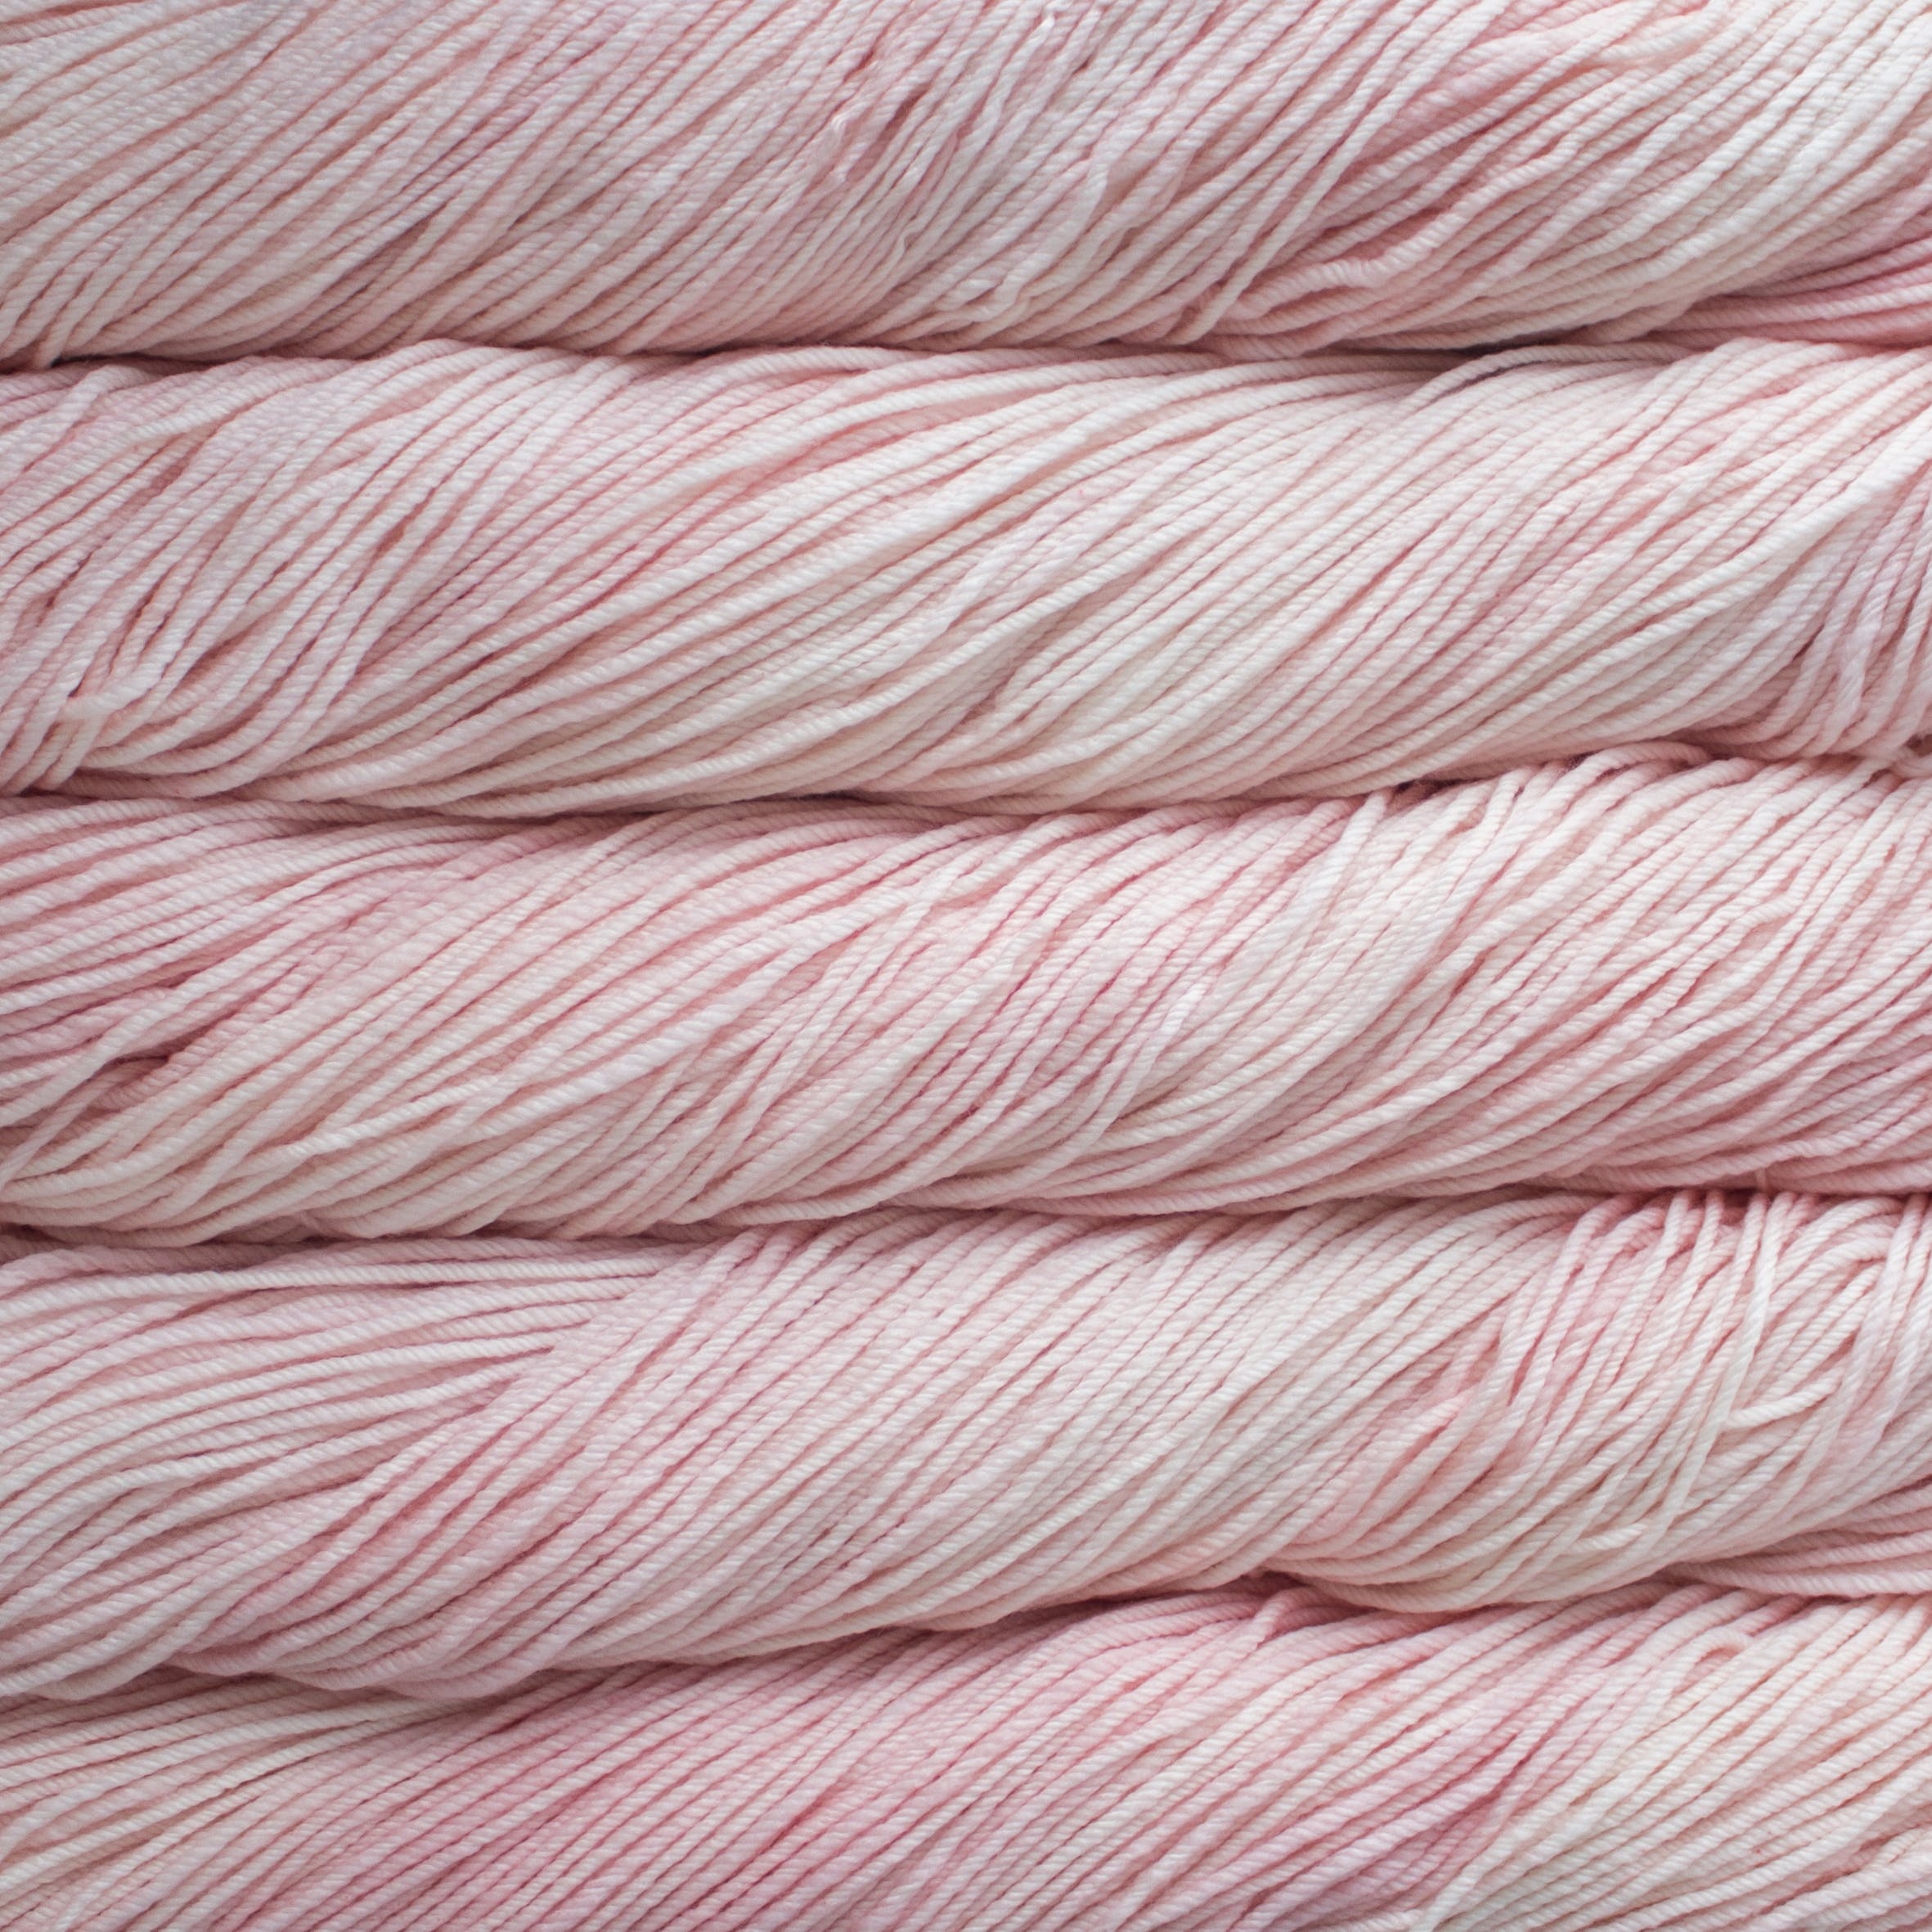 Skein of Malabrigo Rios Worsted weight yarn in the color Almond Blossom (Pink) for knitting and crocheting.